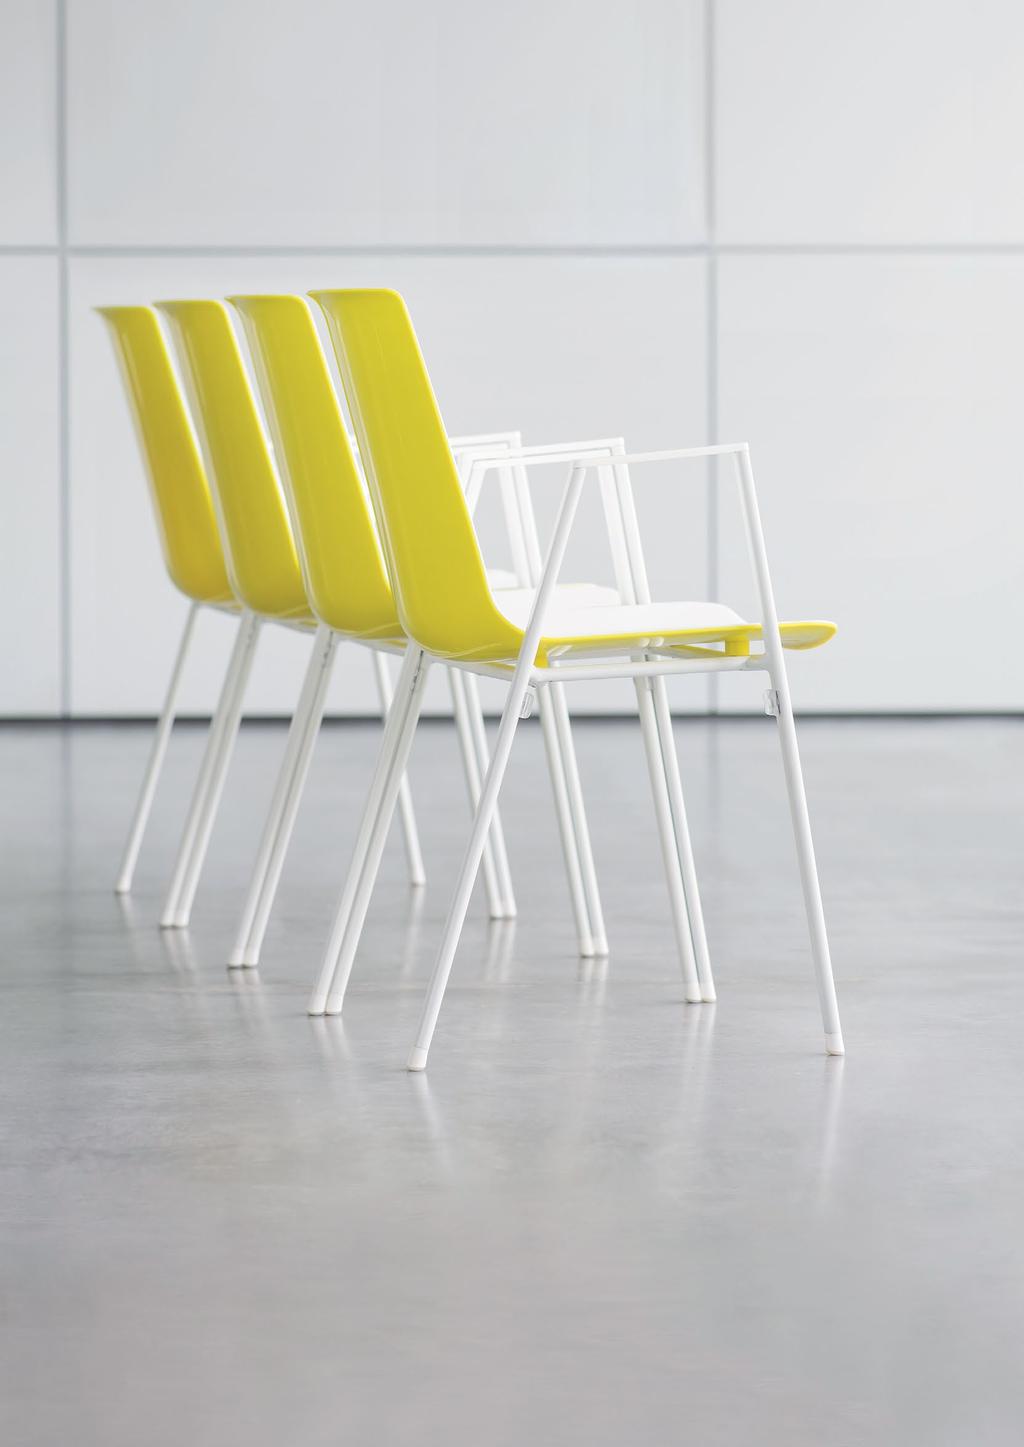 Born from the idea of creating a chair with one shell form and different frame options to suit all main communication areas, nooi is the perfect solution